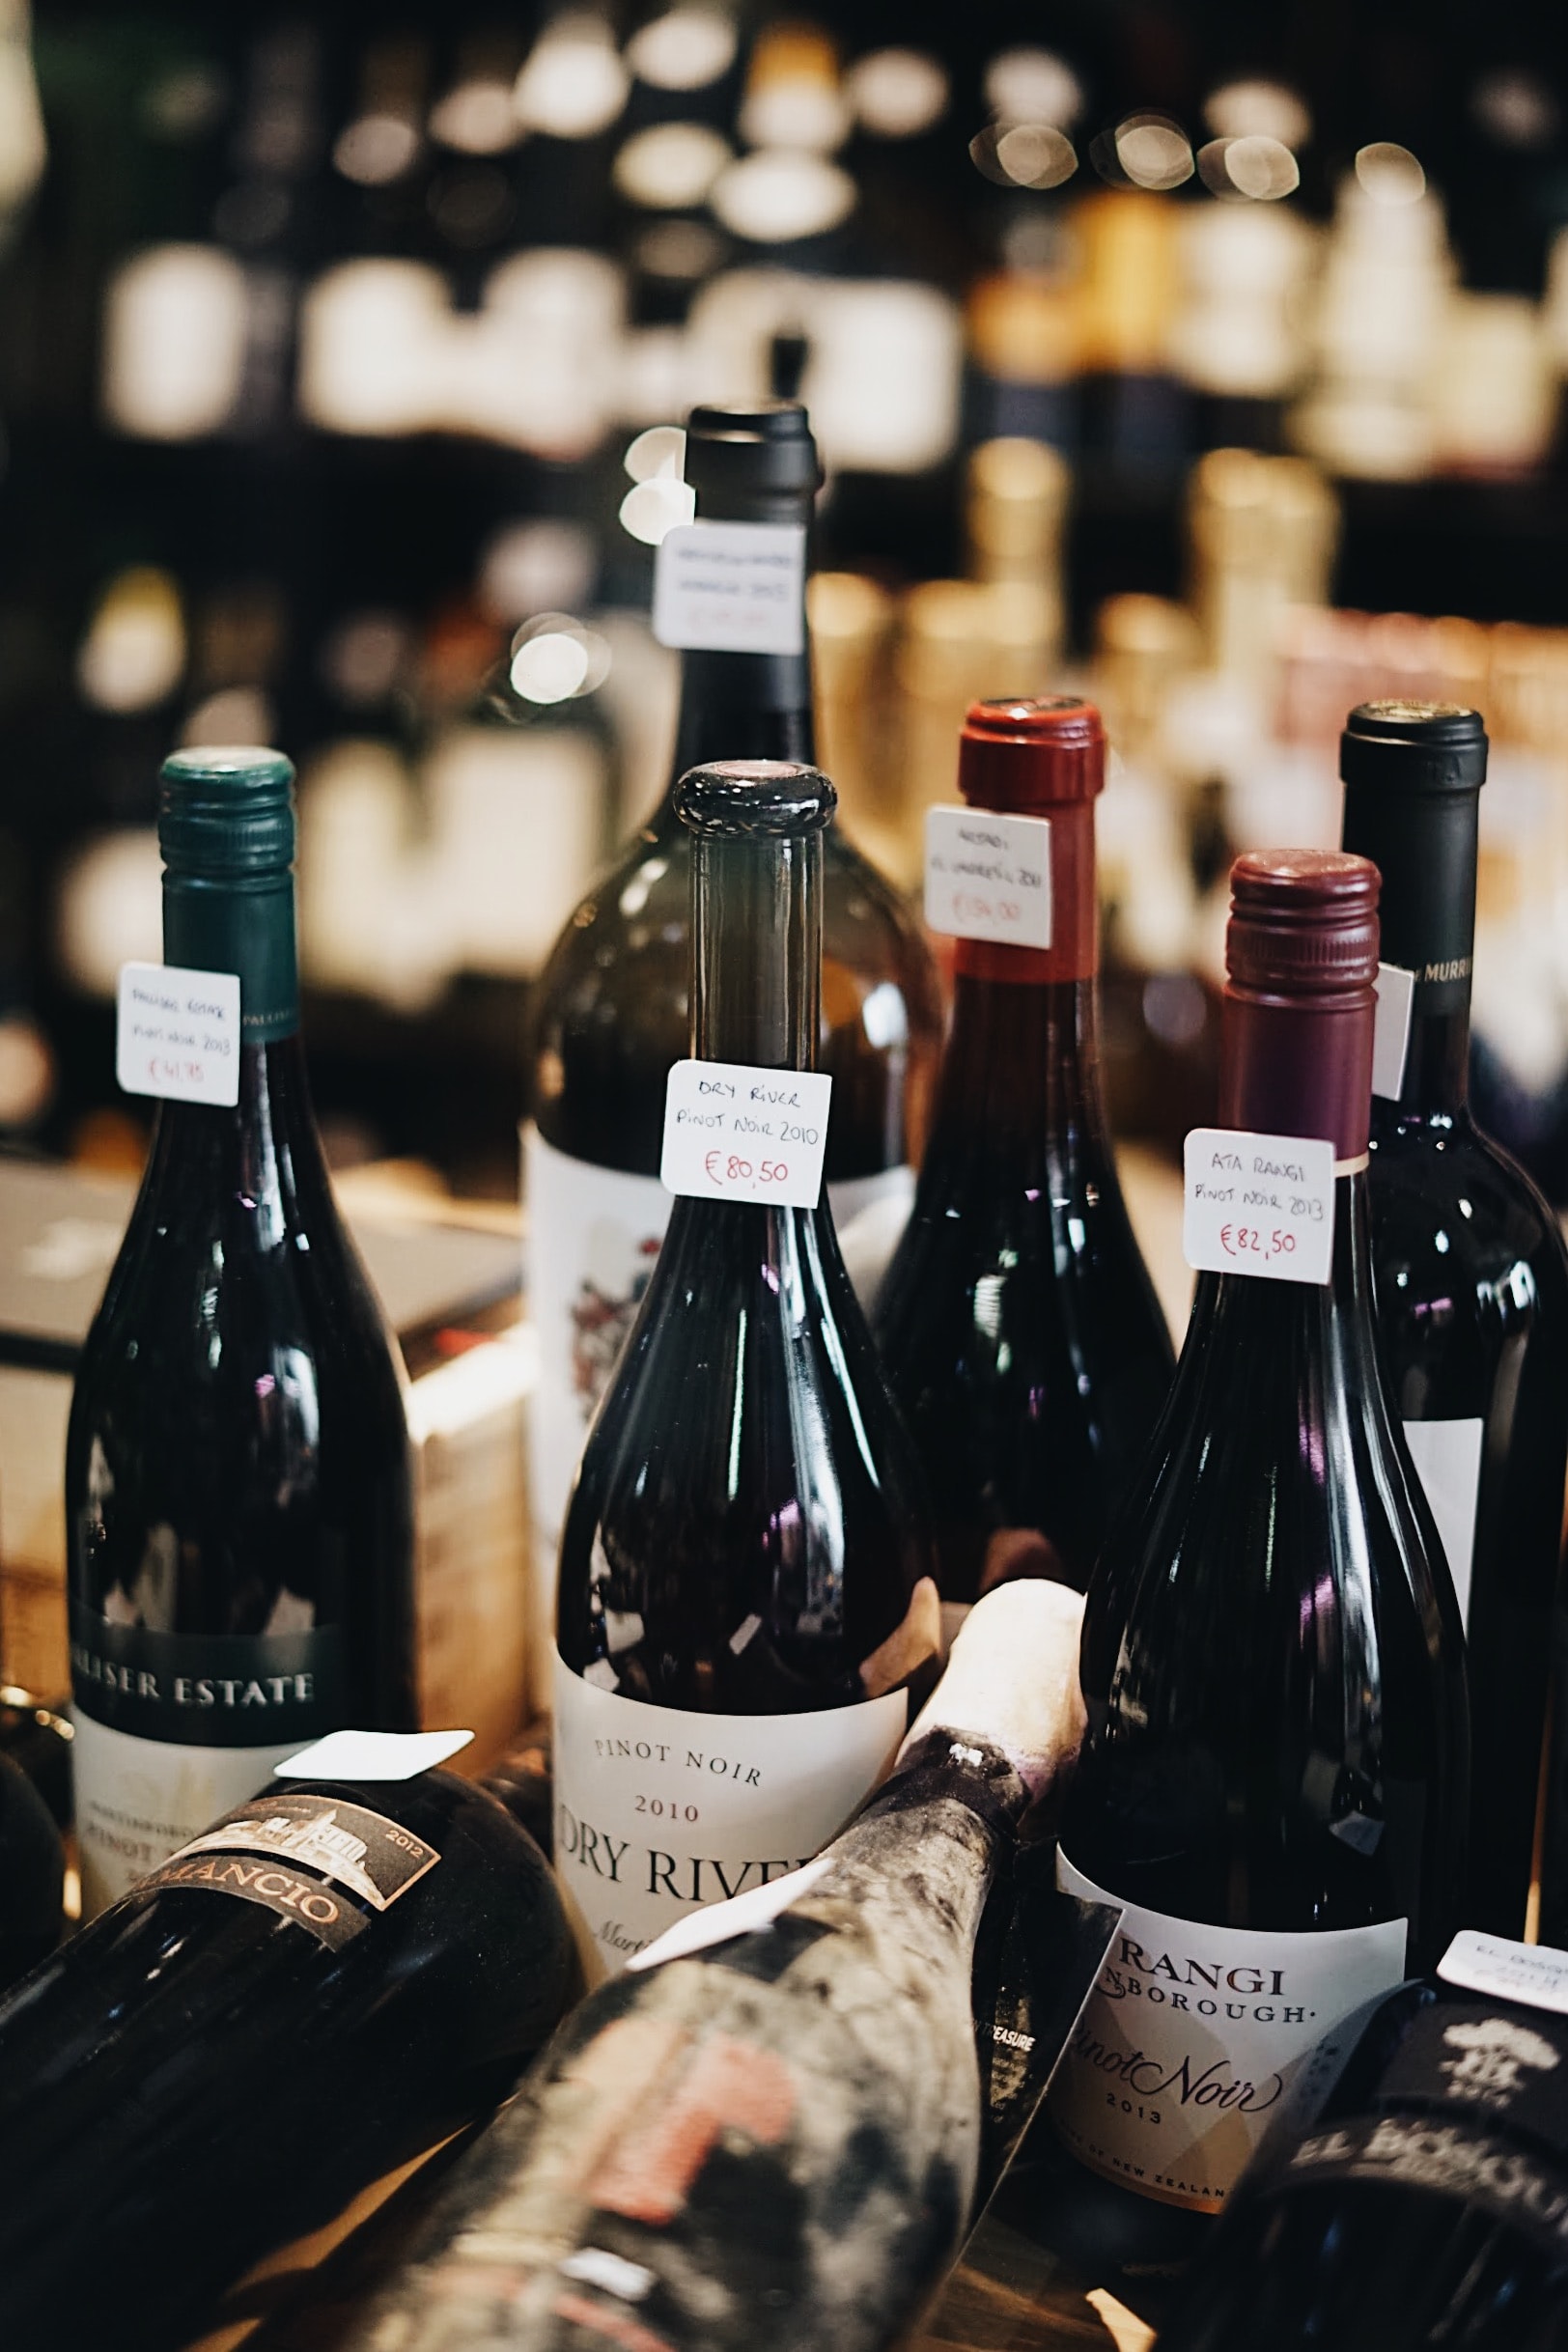 TOP 5 WINES AND WHERE TO BUY THEM IN SOUTHAMPTON!